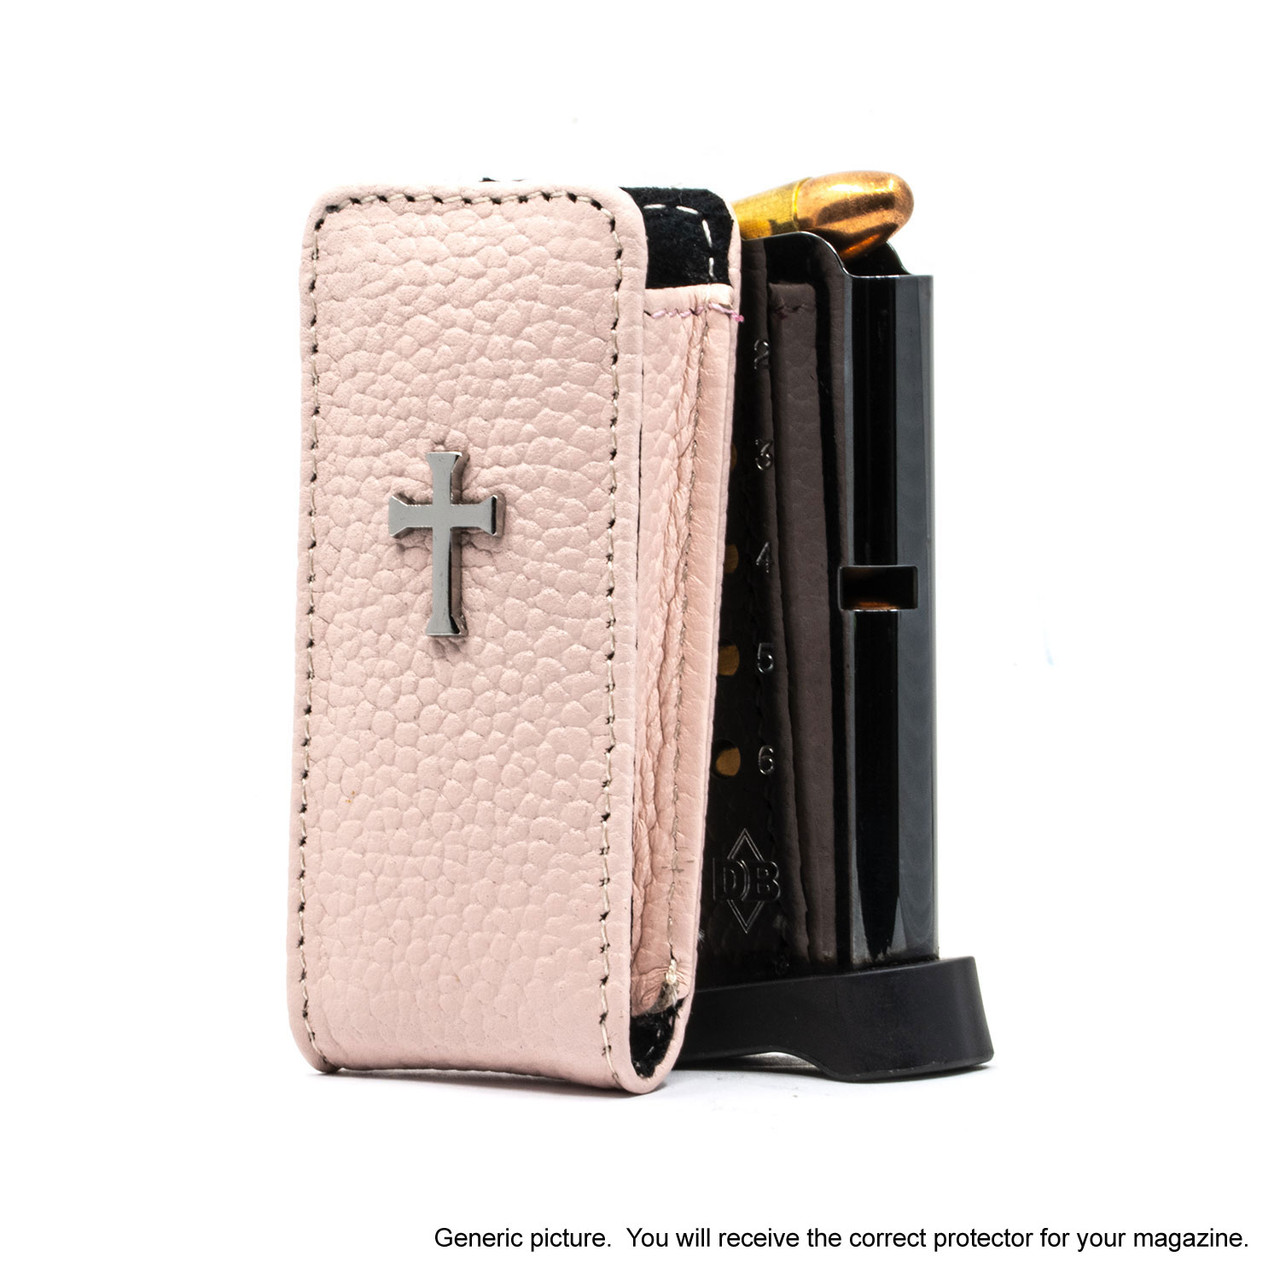 SCCY CPX-1 Pink Carry Faithfully Cross Magazine Pocket Protector